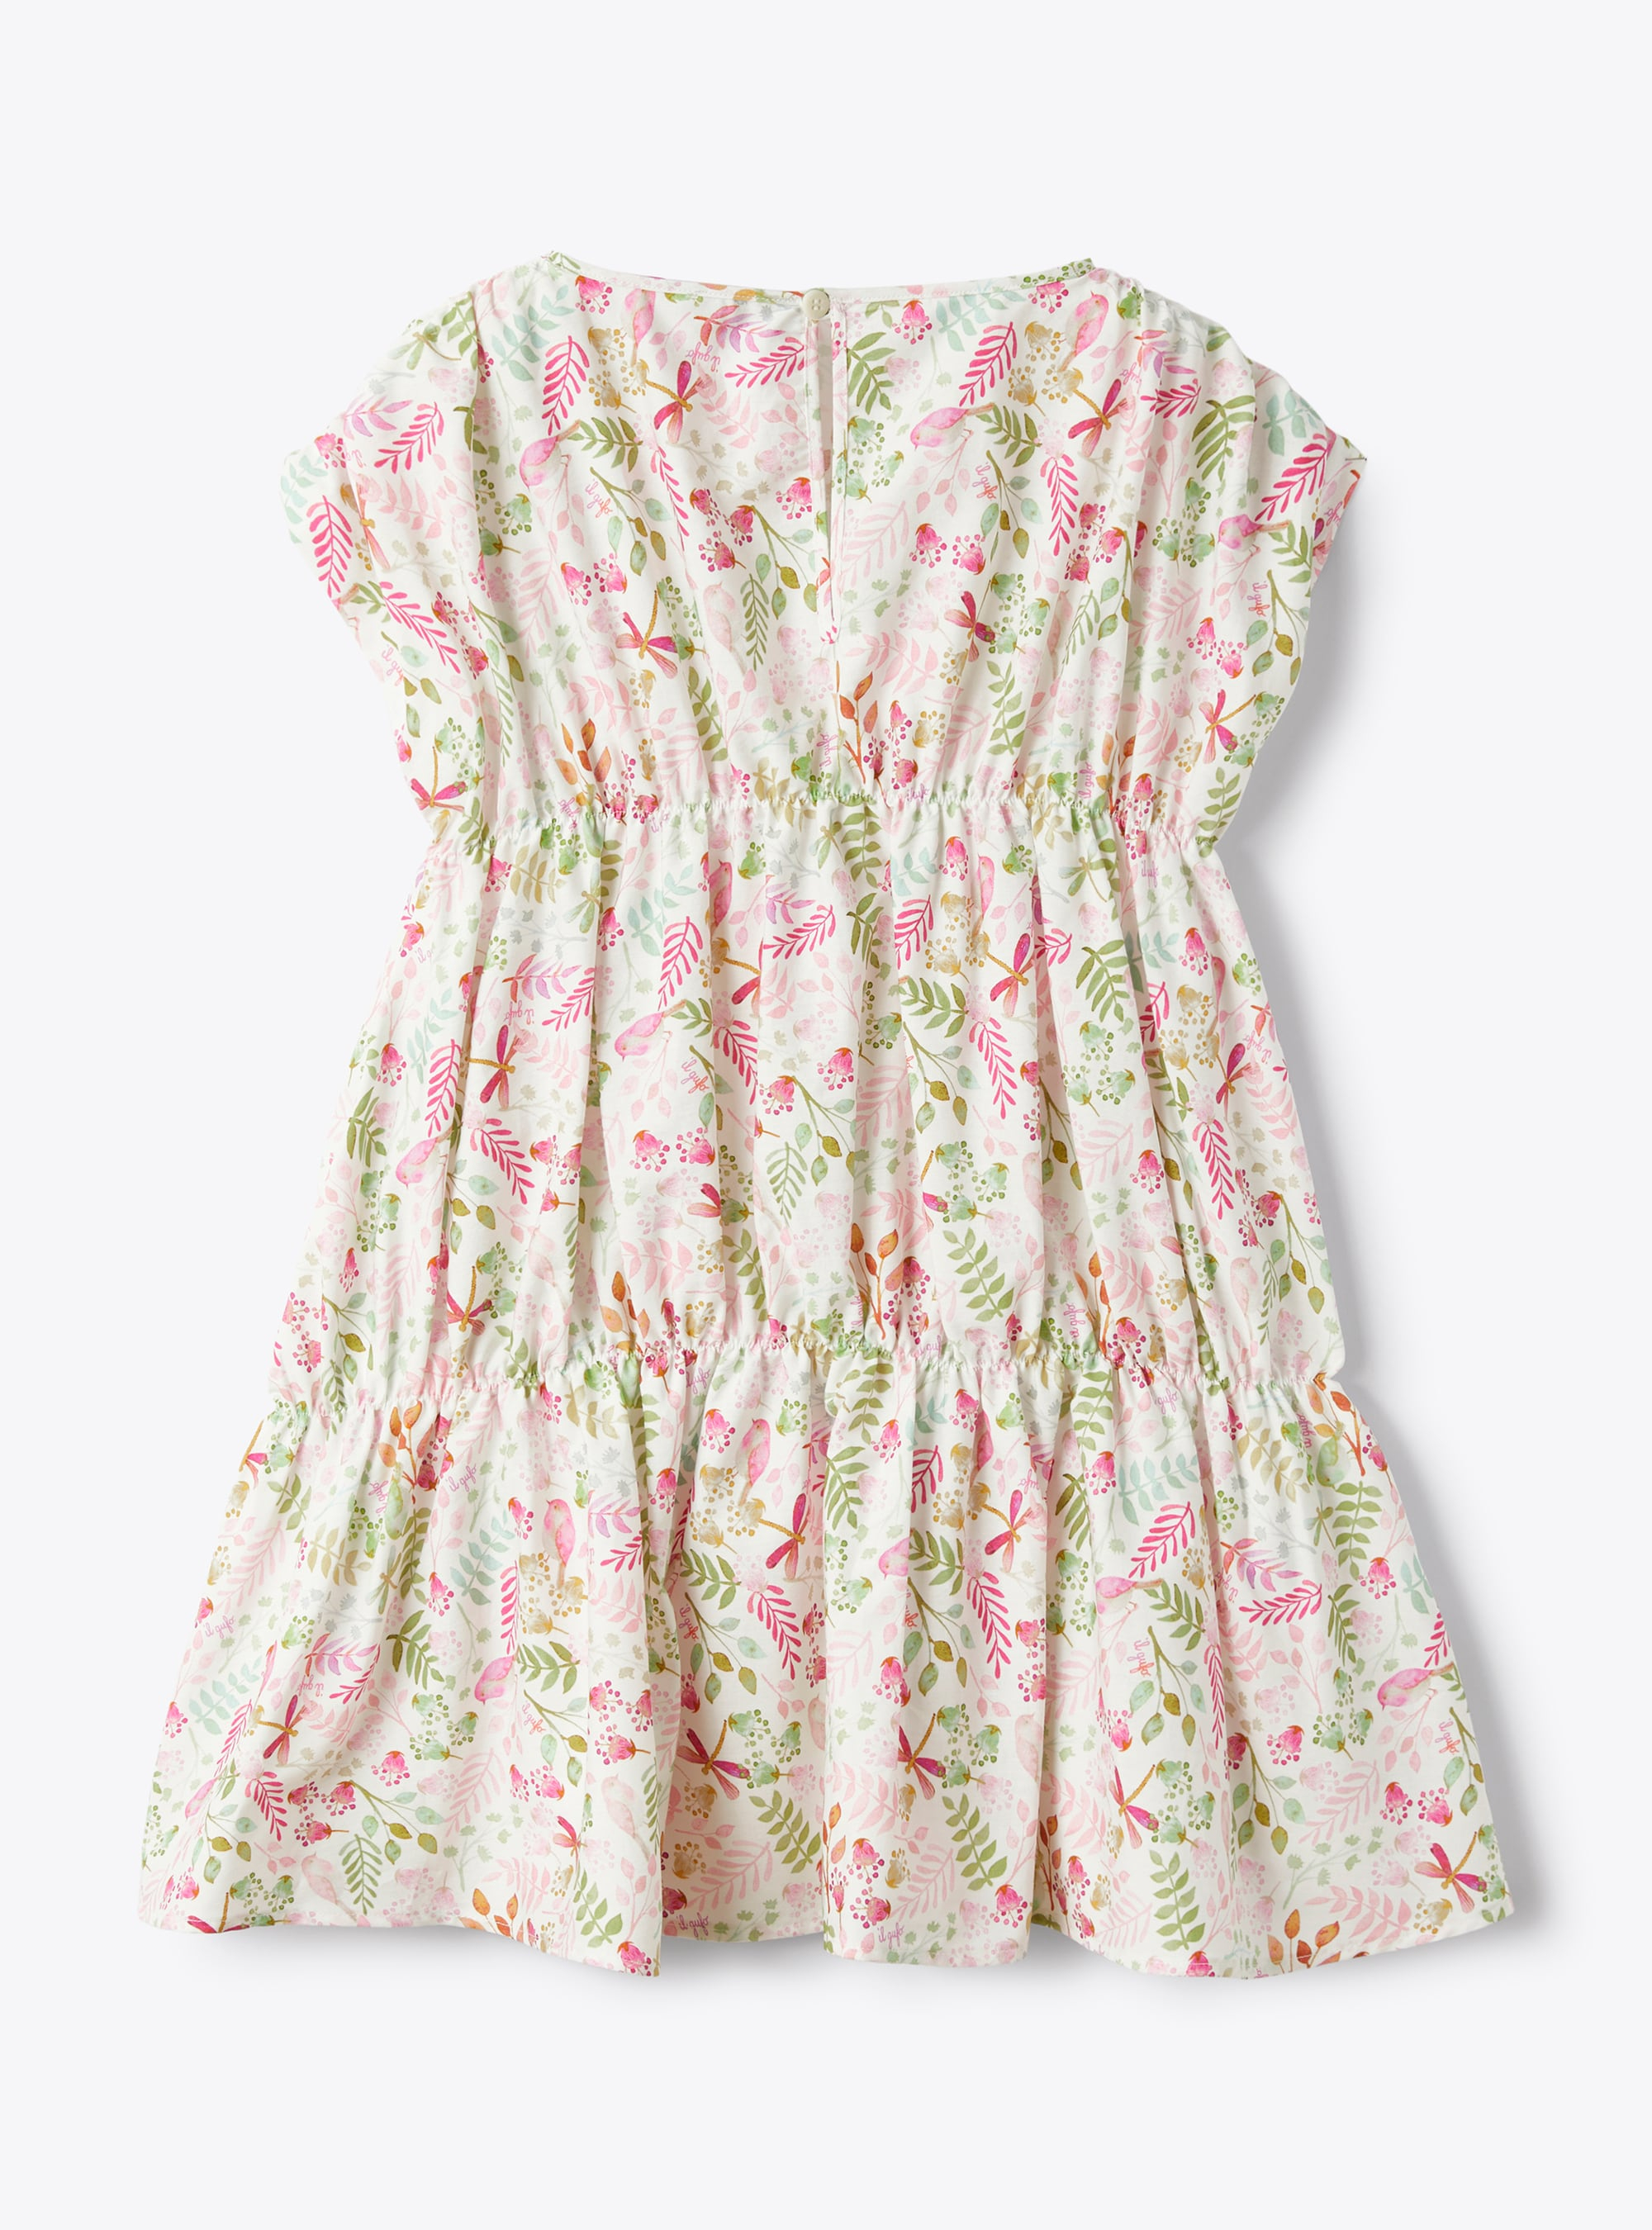 Dress with exclusive print design - Pink | Il Gufo